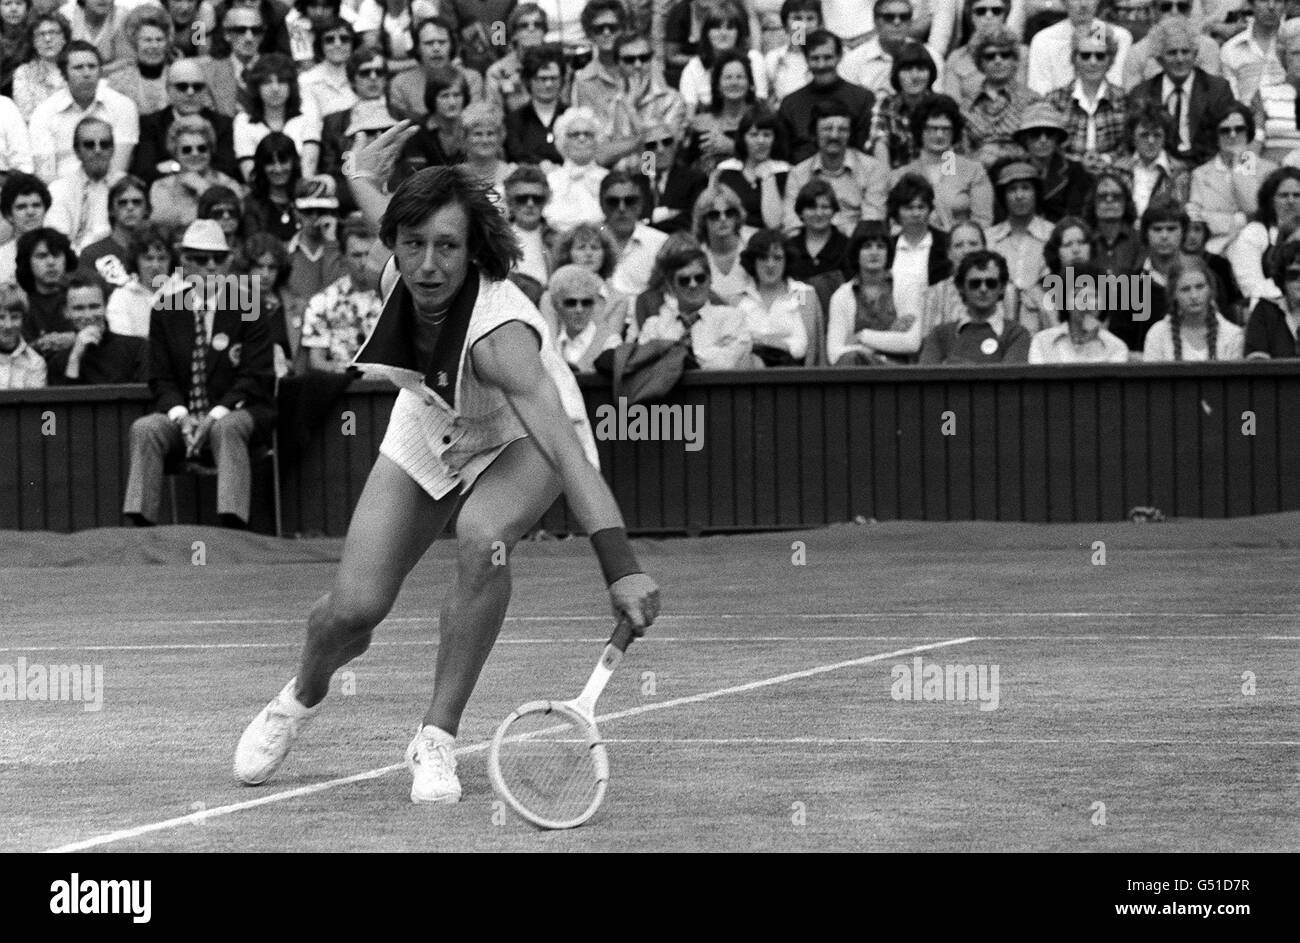 Czechoslovakia's Martina Navratilova in action against America's Chris Evert in the singles final on Centre Court during Wimbledon. Navratilova defeated Evert 2-6, 6-4, 7-5 to win the ladies Championship. Stock Photo